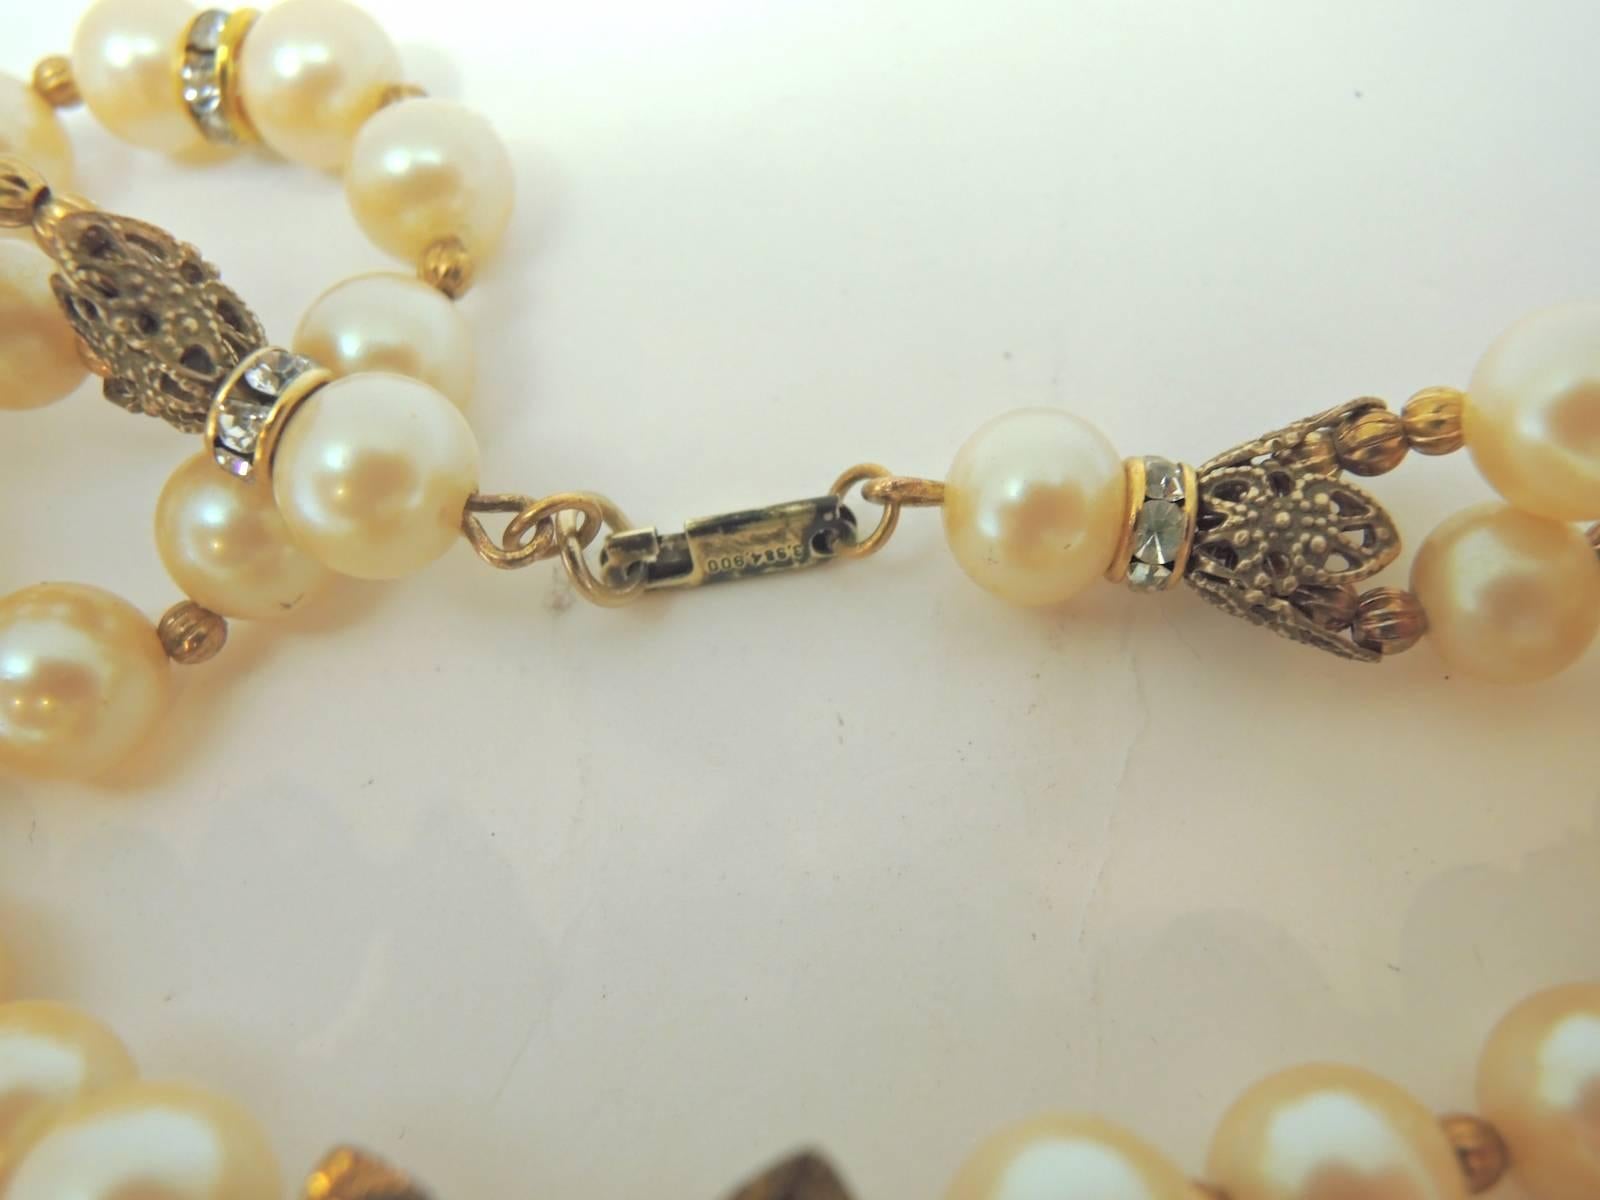 This Miriam Haskell necklace was designed with two strands of faux pearls. There are rondelles and gold tone beads that are used as spacers. This necklace leads to a lovely centerpiece made with three large flowers. All of them have faux seed pearls